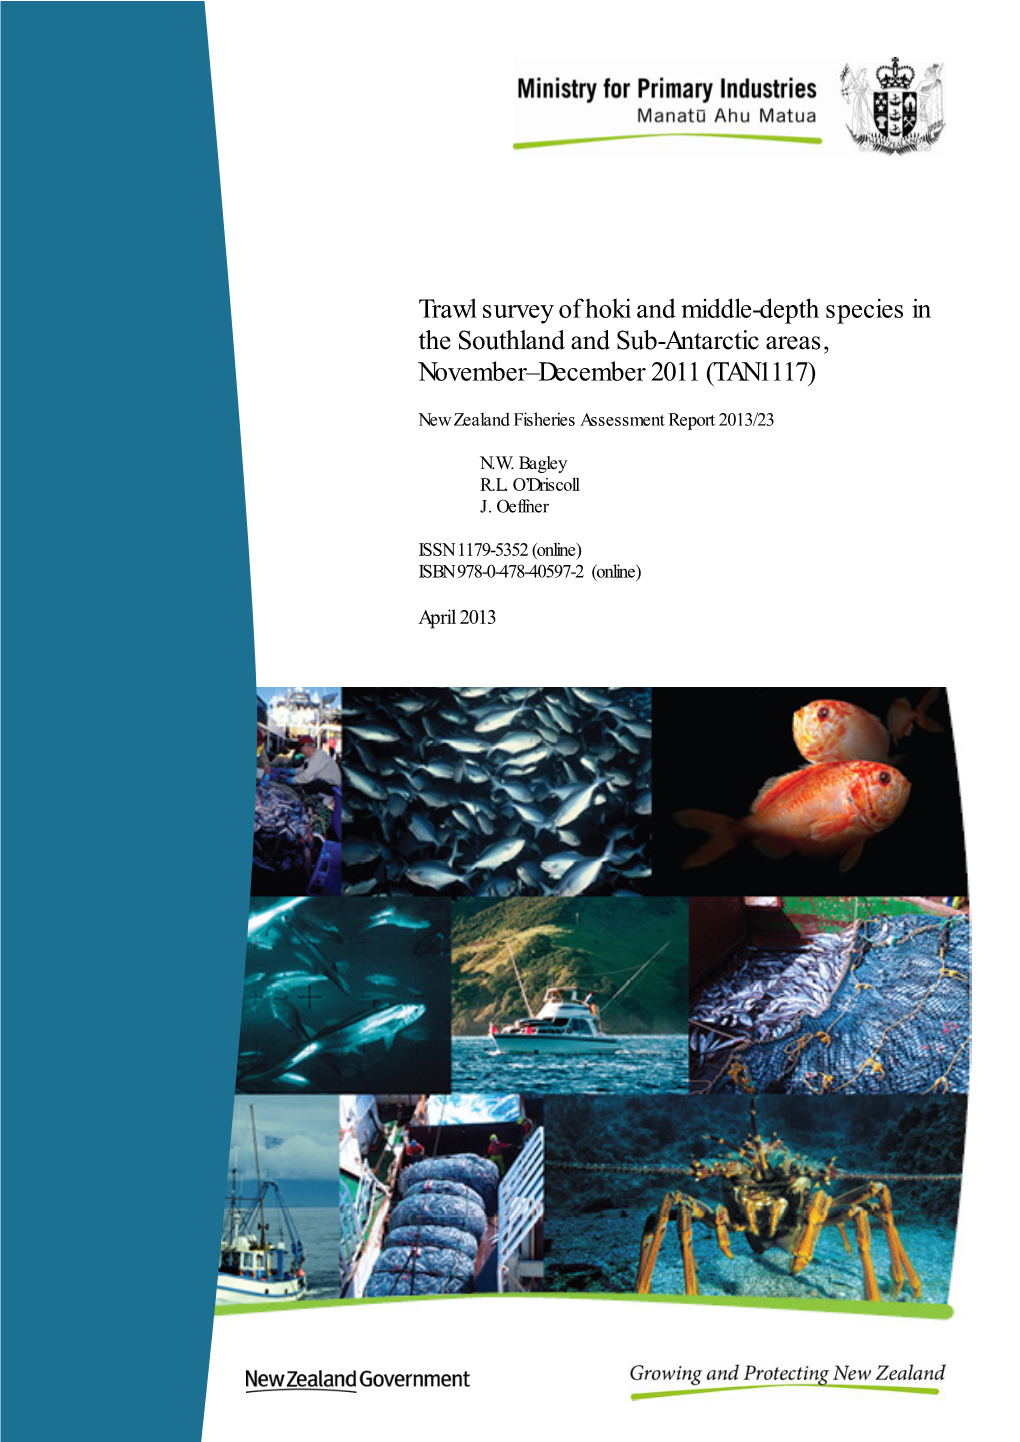 Trawl Survey of Hoki and Middle-Depth Species in the Southland and Sub-Antarctic Areas, November–December 2011 (TAN1117)